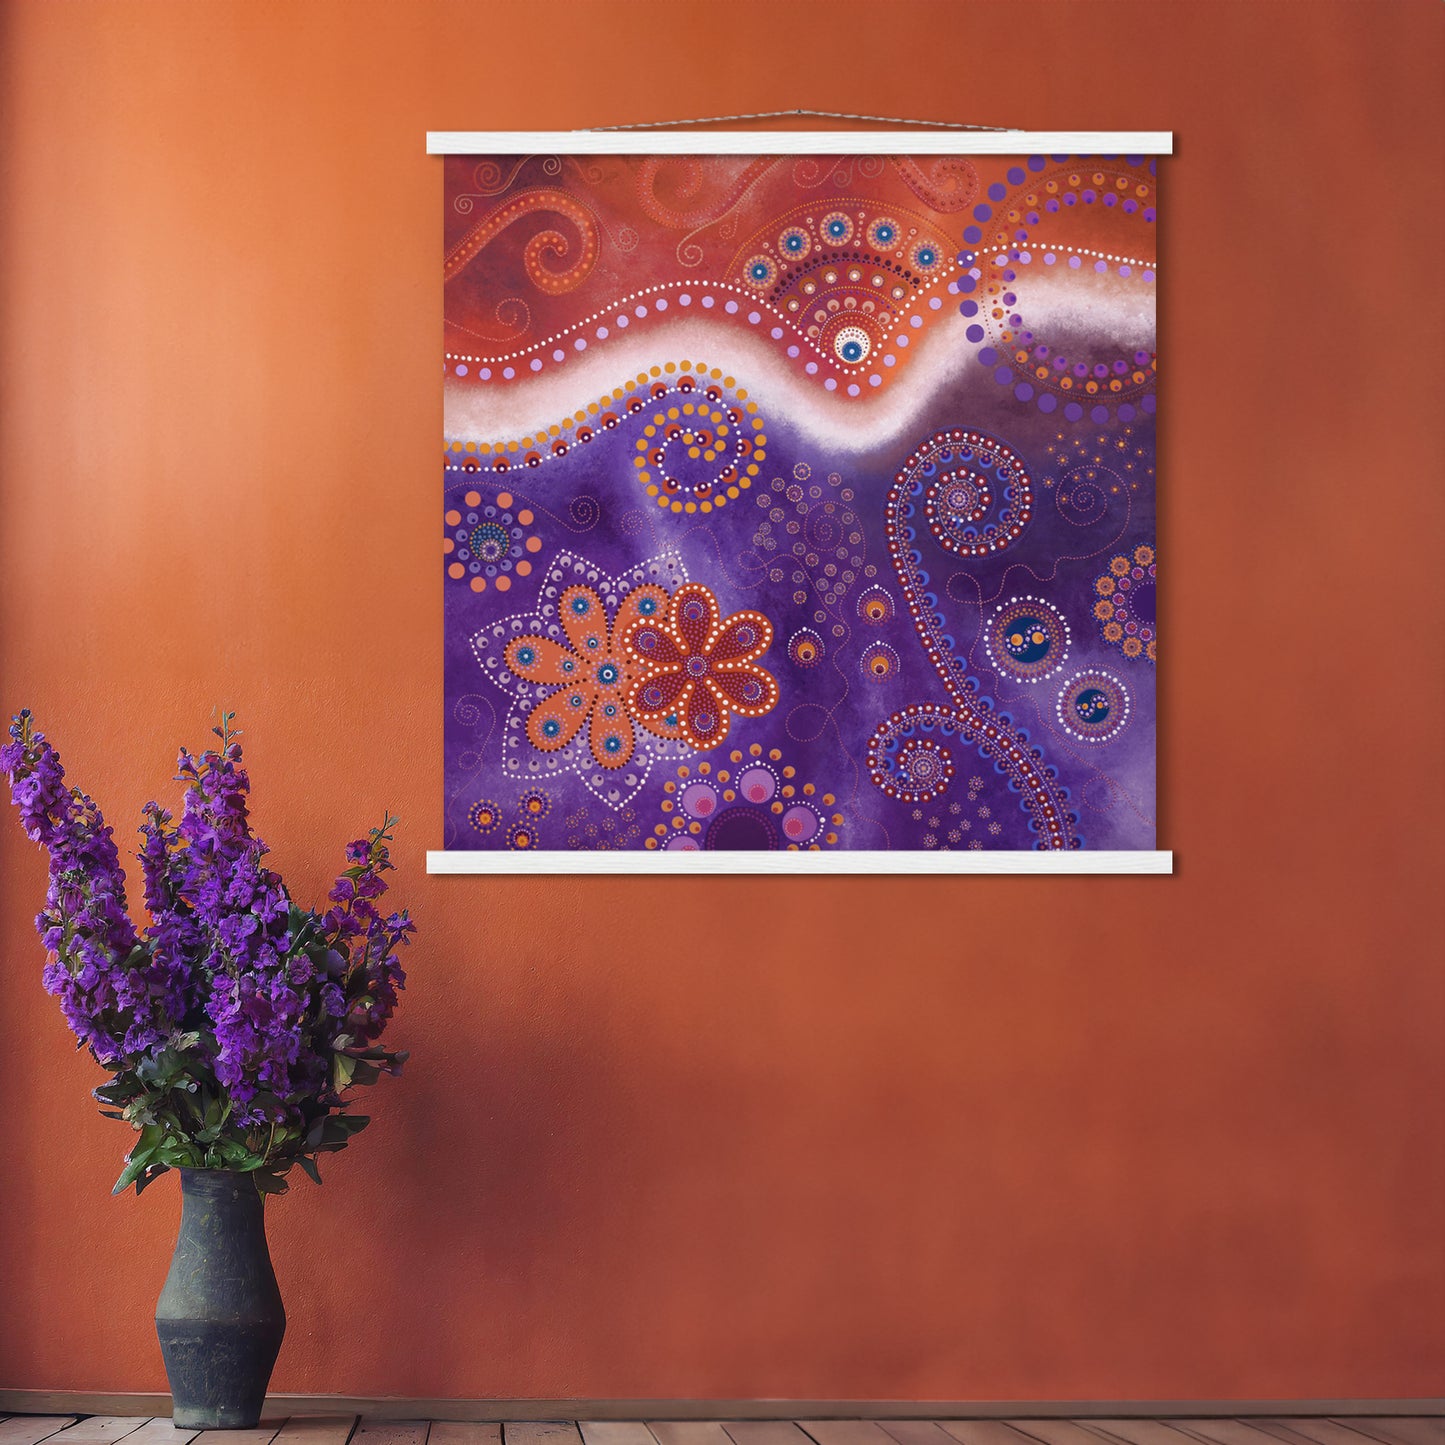 "The Happiness inside" - Orange and purple - by Fanny Fay Engström